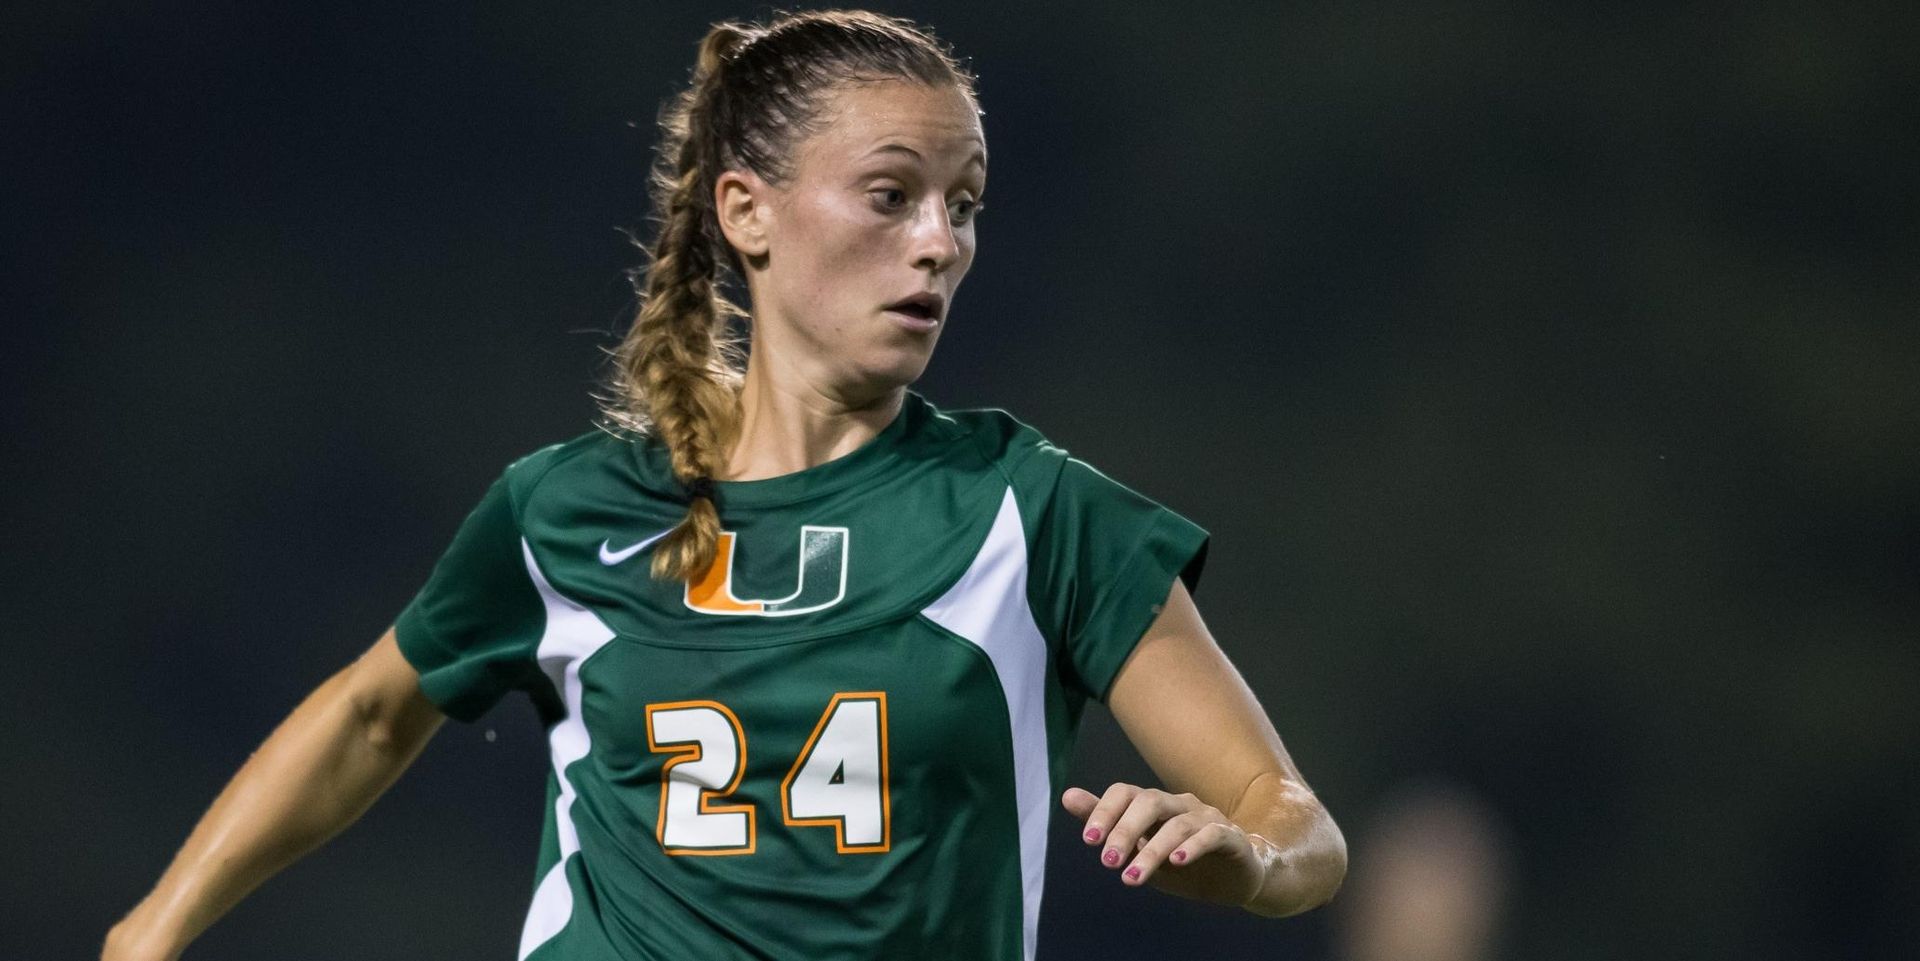 Soccer Looks to Upend No. 1 Virginia Thursday